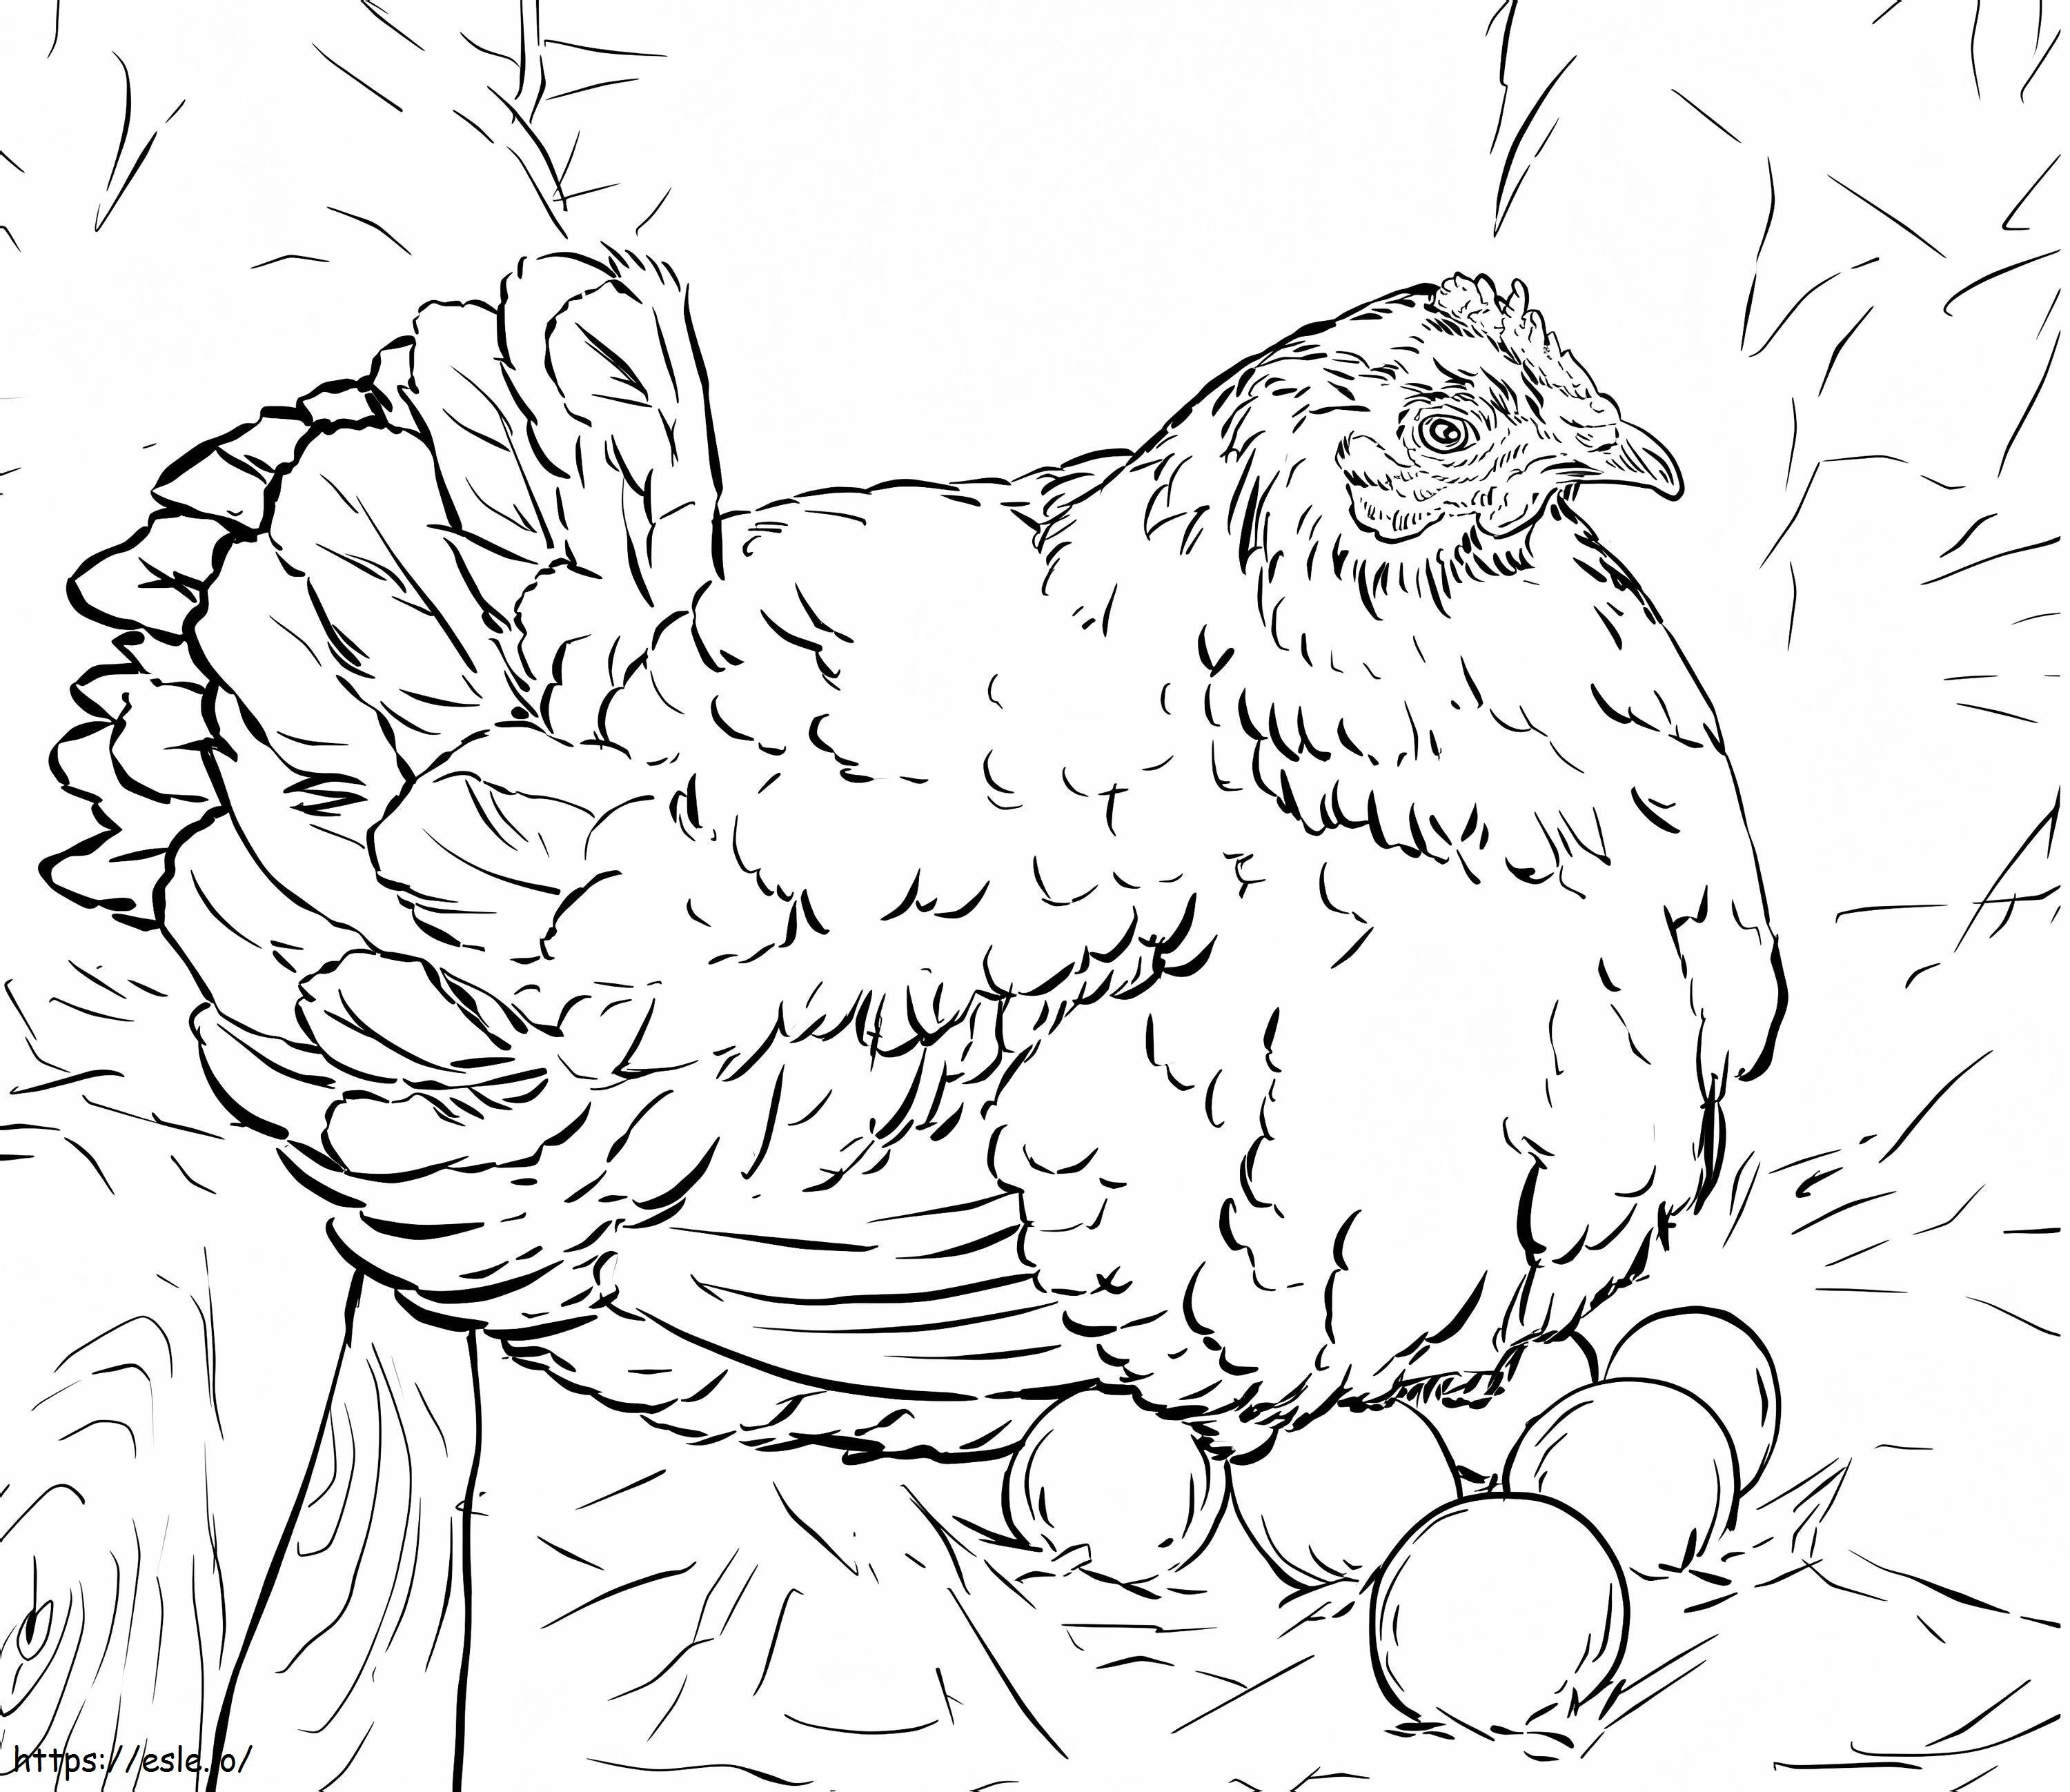 Hen Laying Eggs coloring page